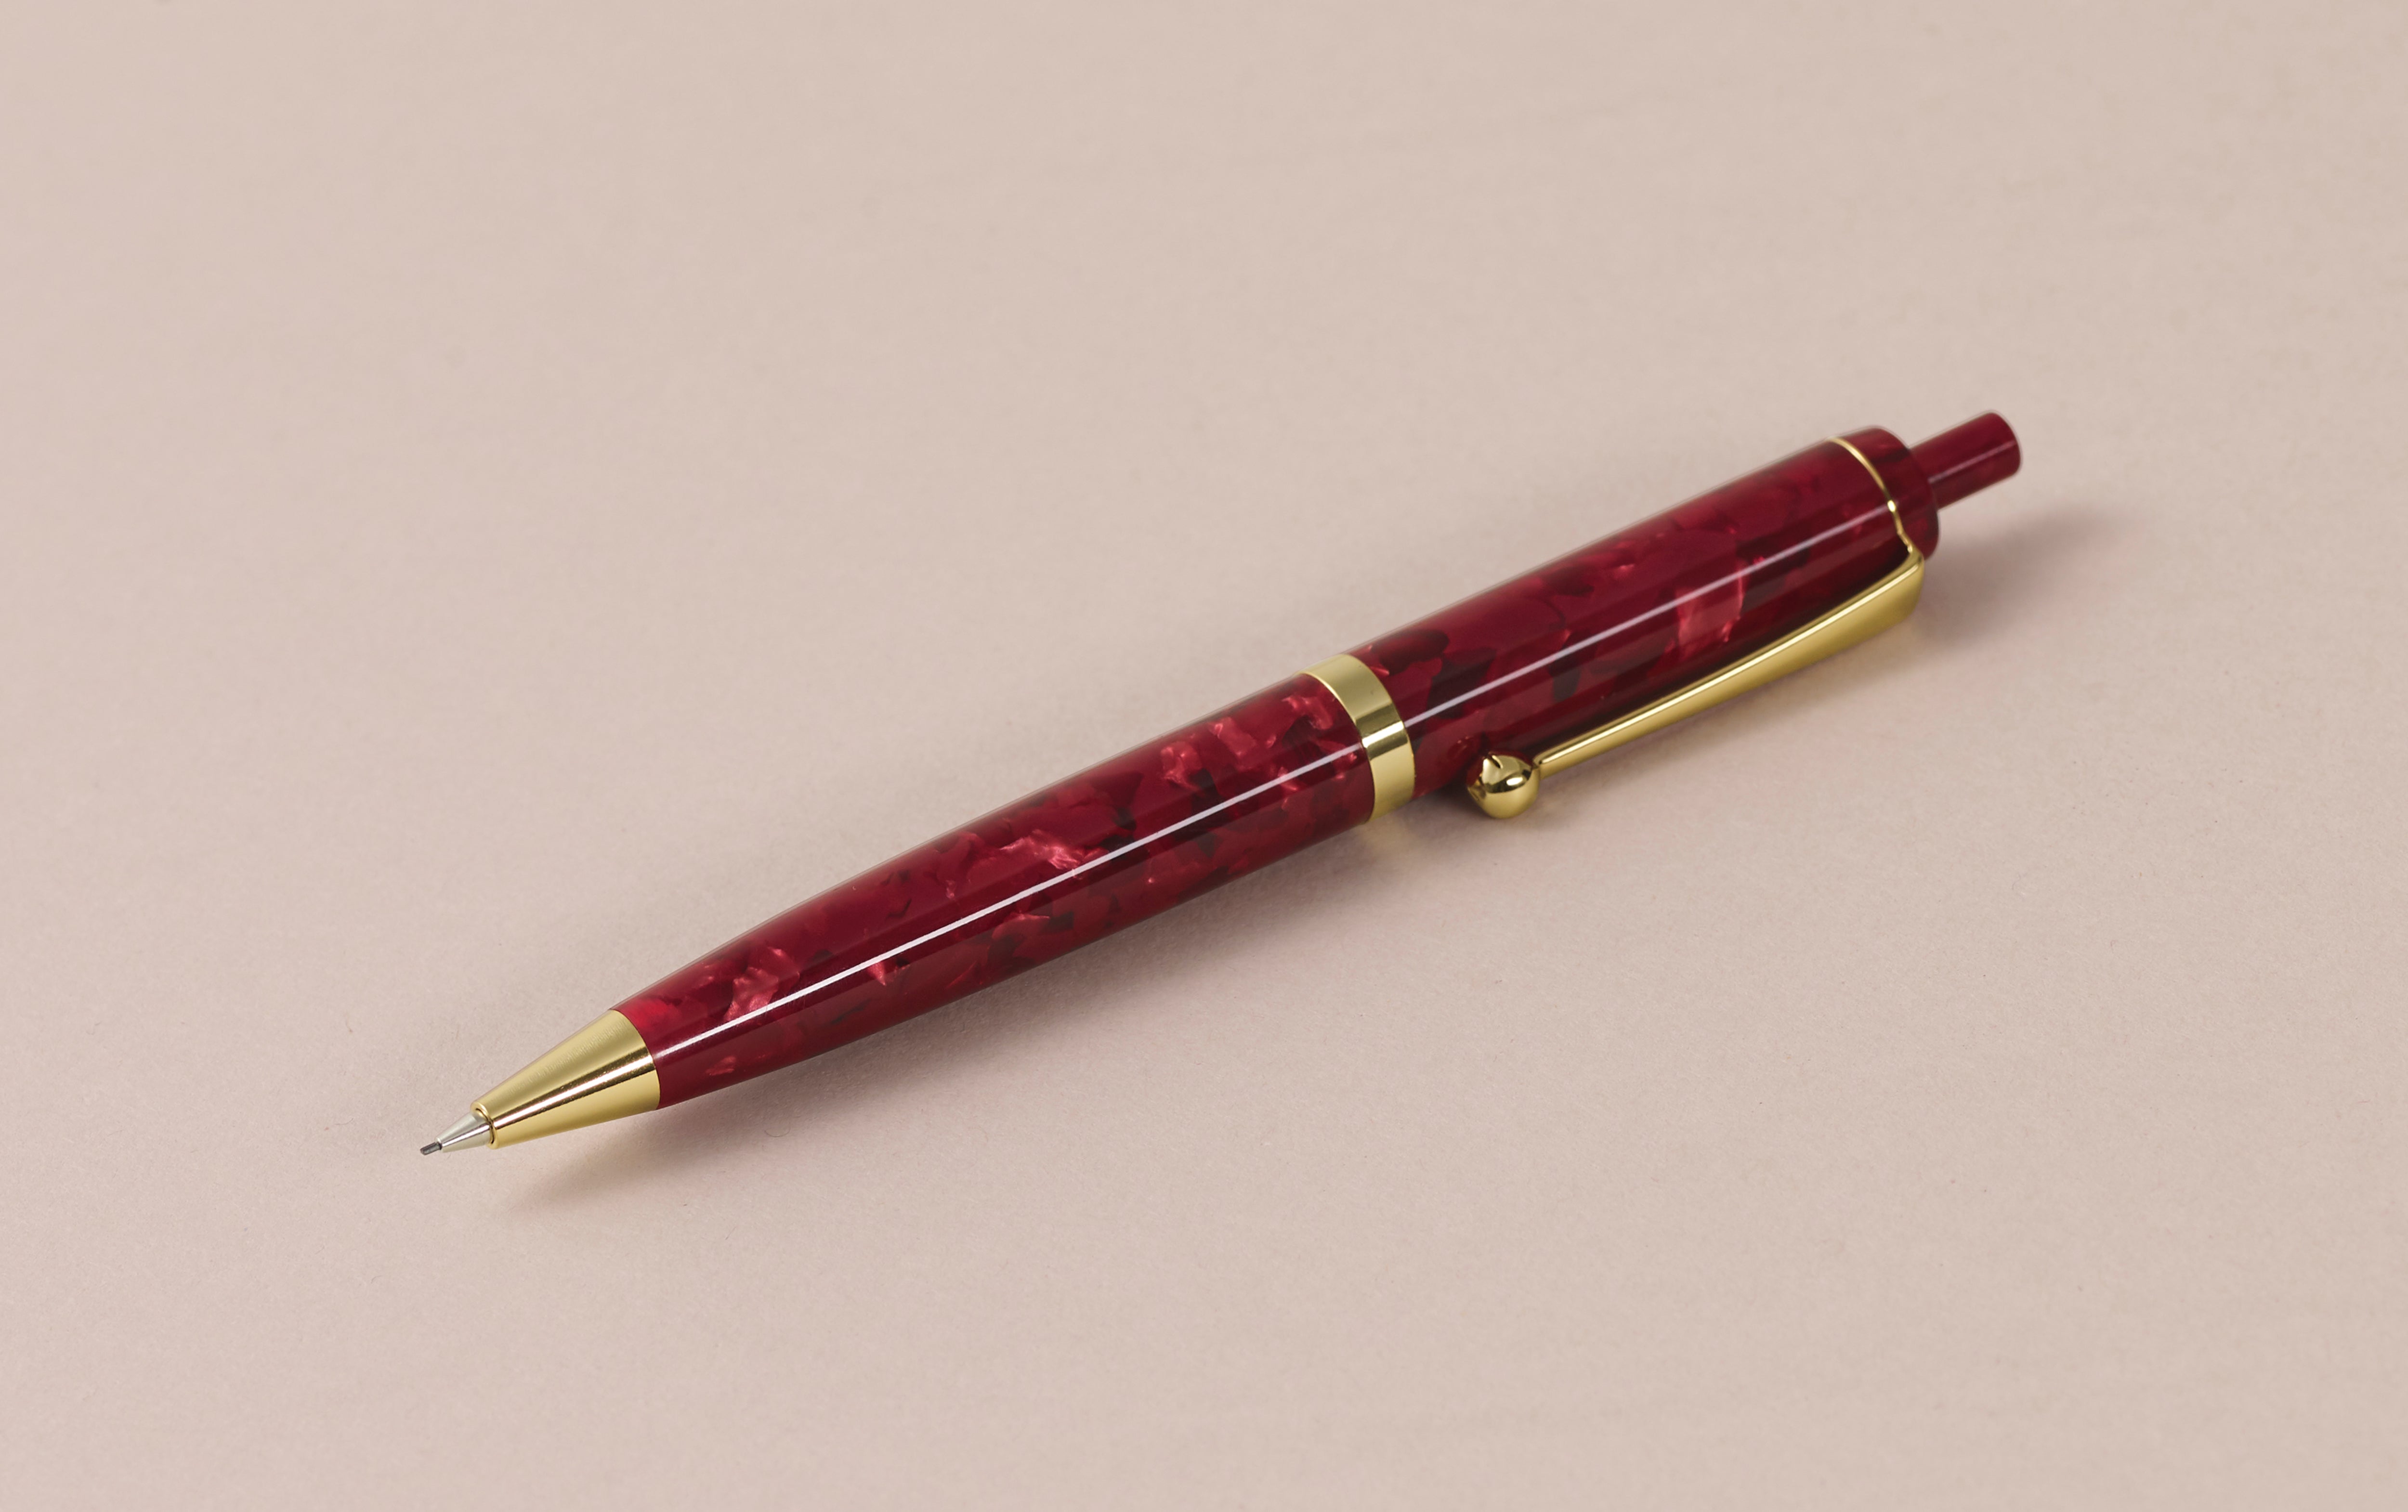 Ohnishi Seisakusho Red Marble Acetate 0.5mm Mechanical Pencil